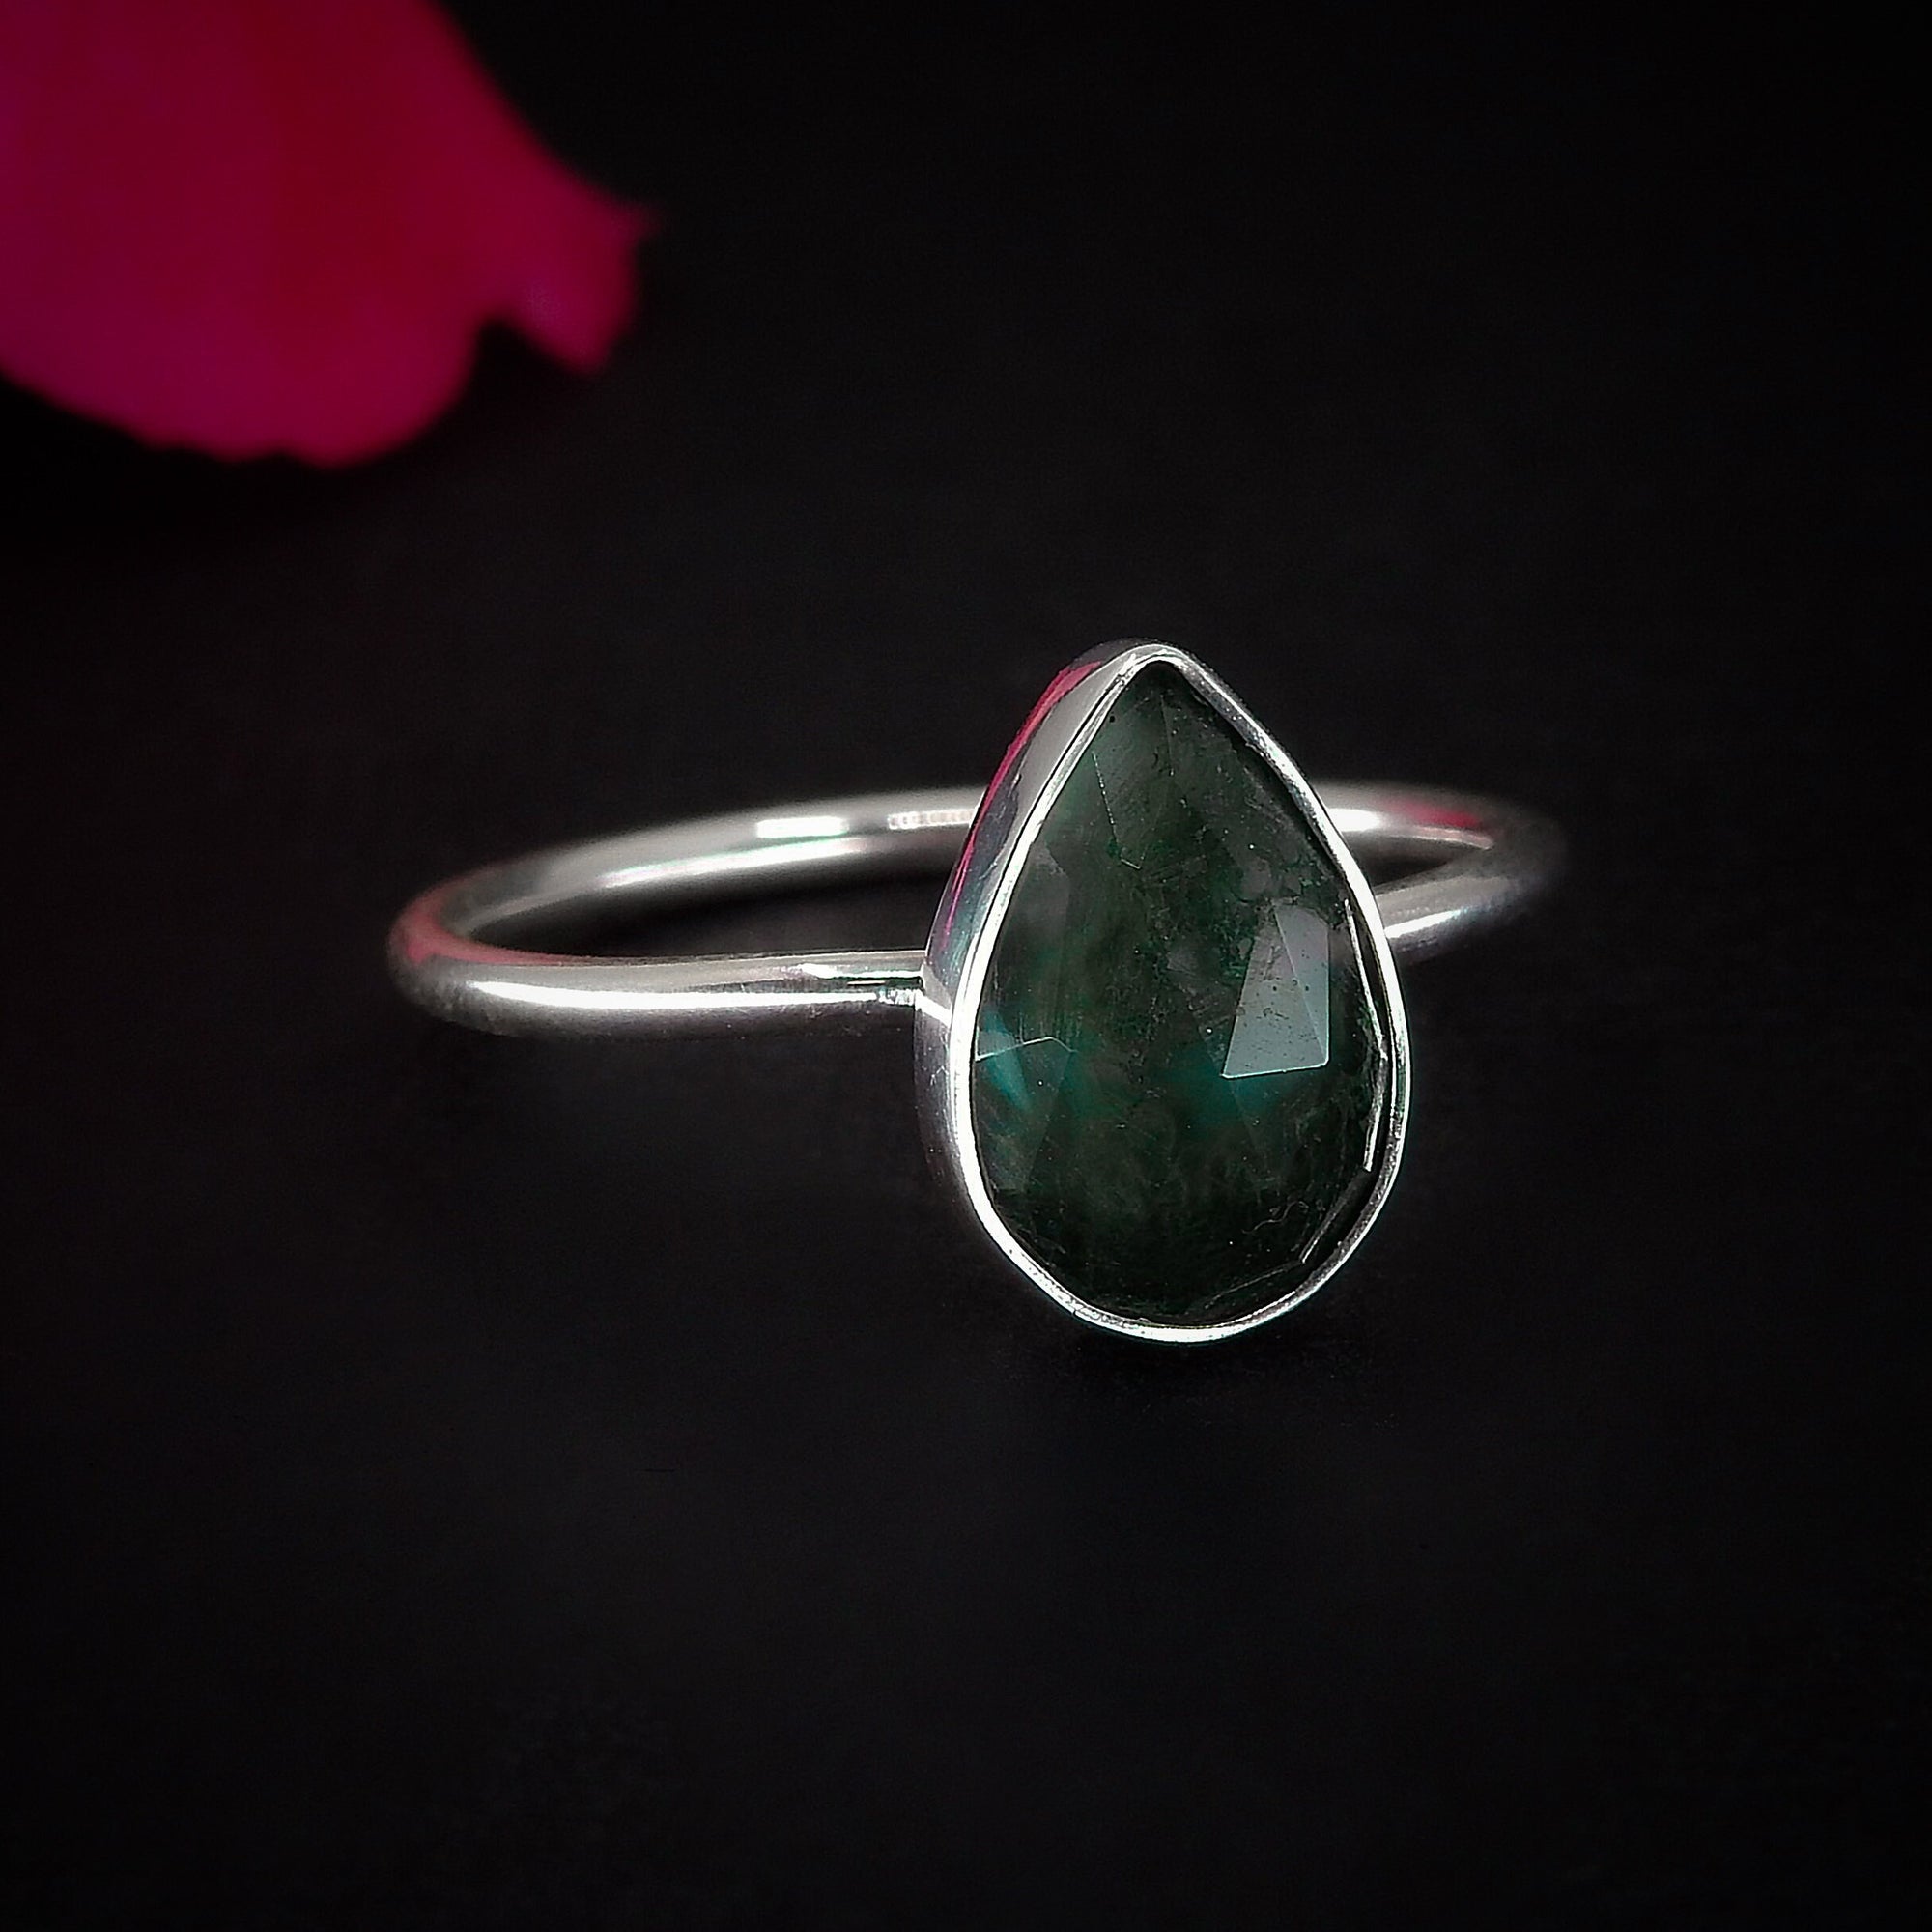 Rose Cut Moss Agate Ring - Size 10 - Sterling Silver - Dainty Moss Agate Jewelry - Faceted Stone Ring - Leaf Ring - Teardrop Tree Agate OOAK